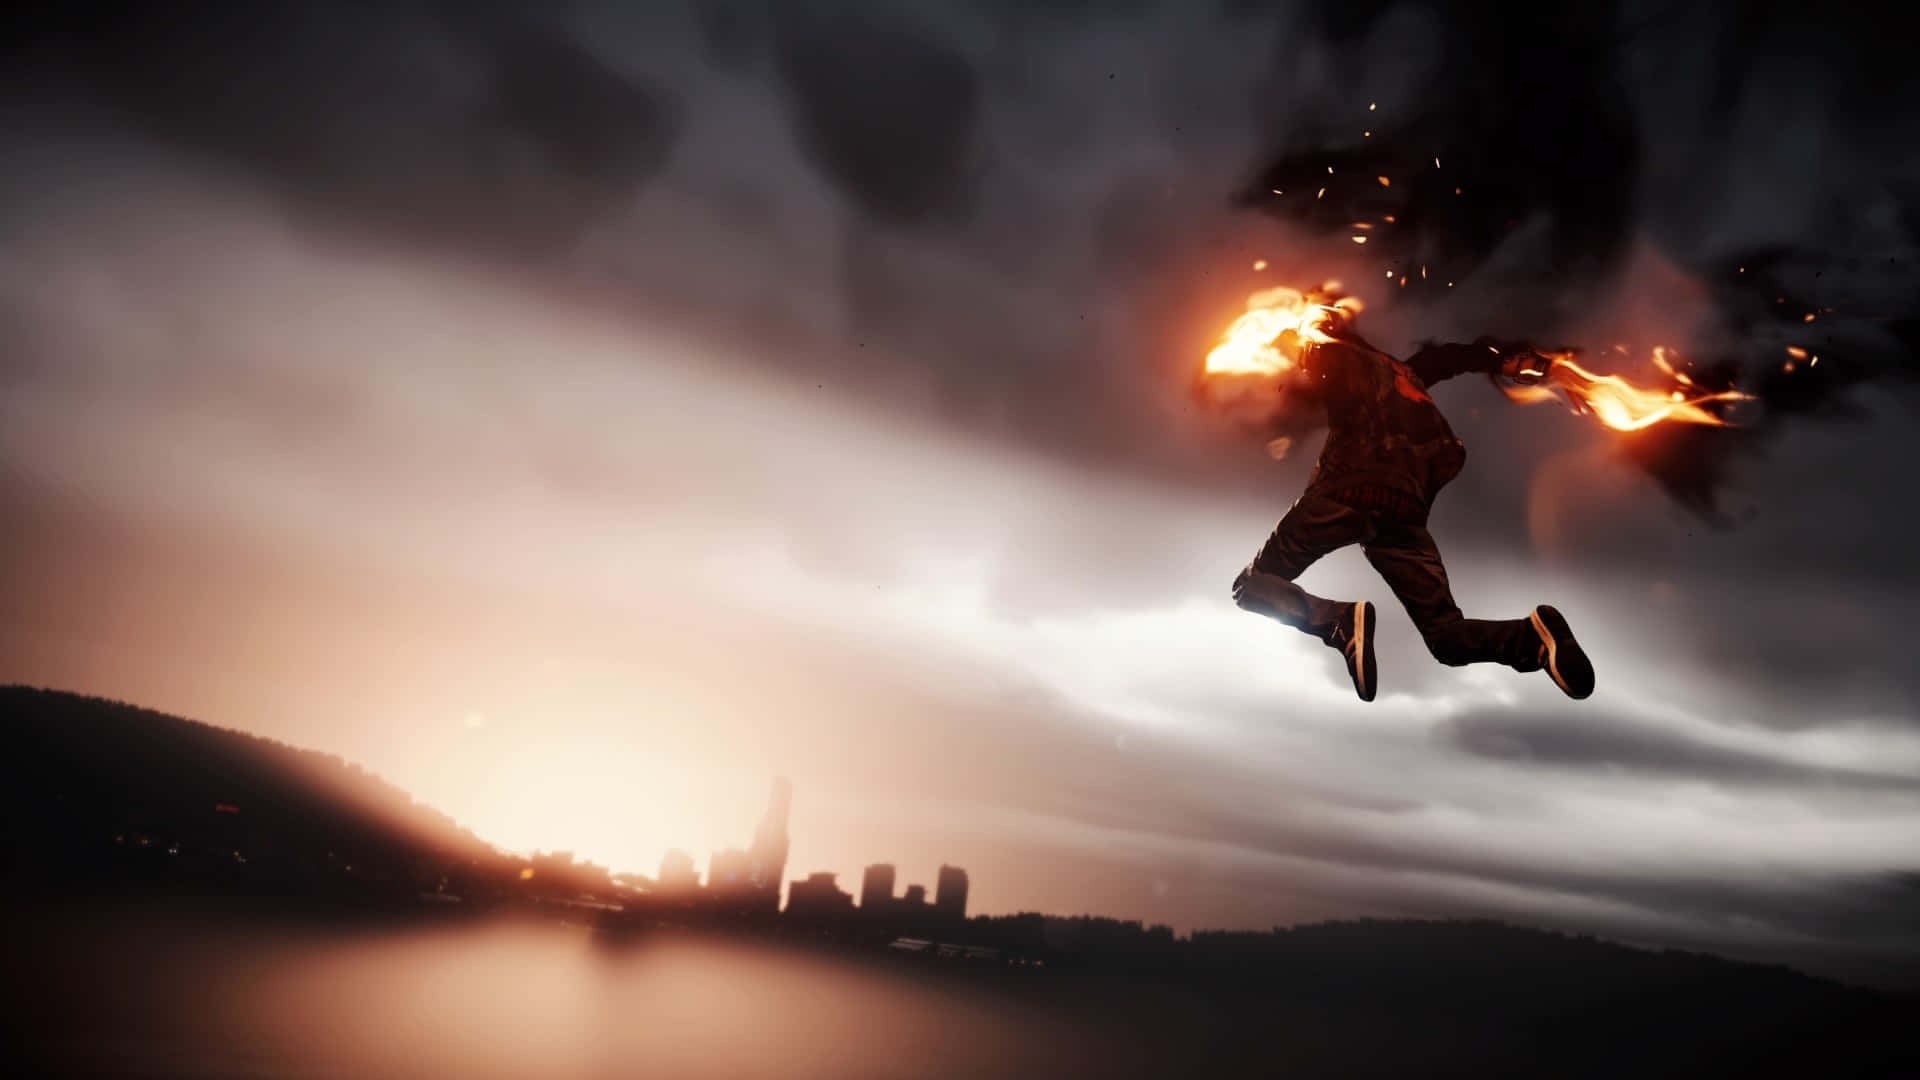 Guy Flying With Fire In Hands In Infamous Wallpaper